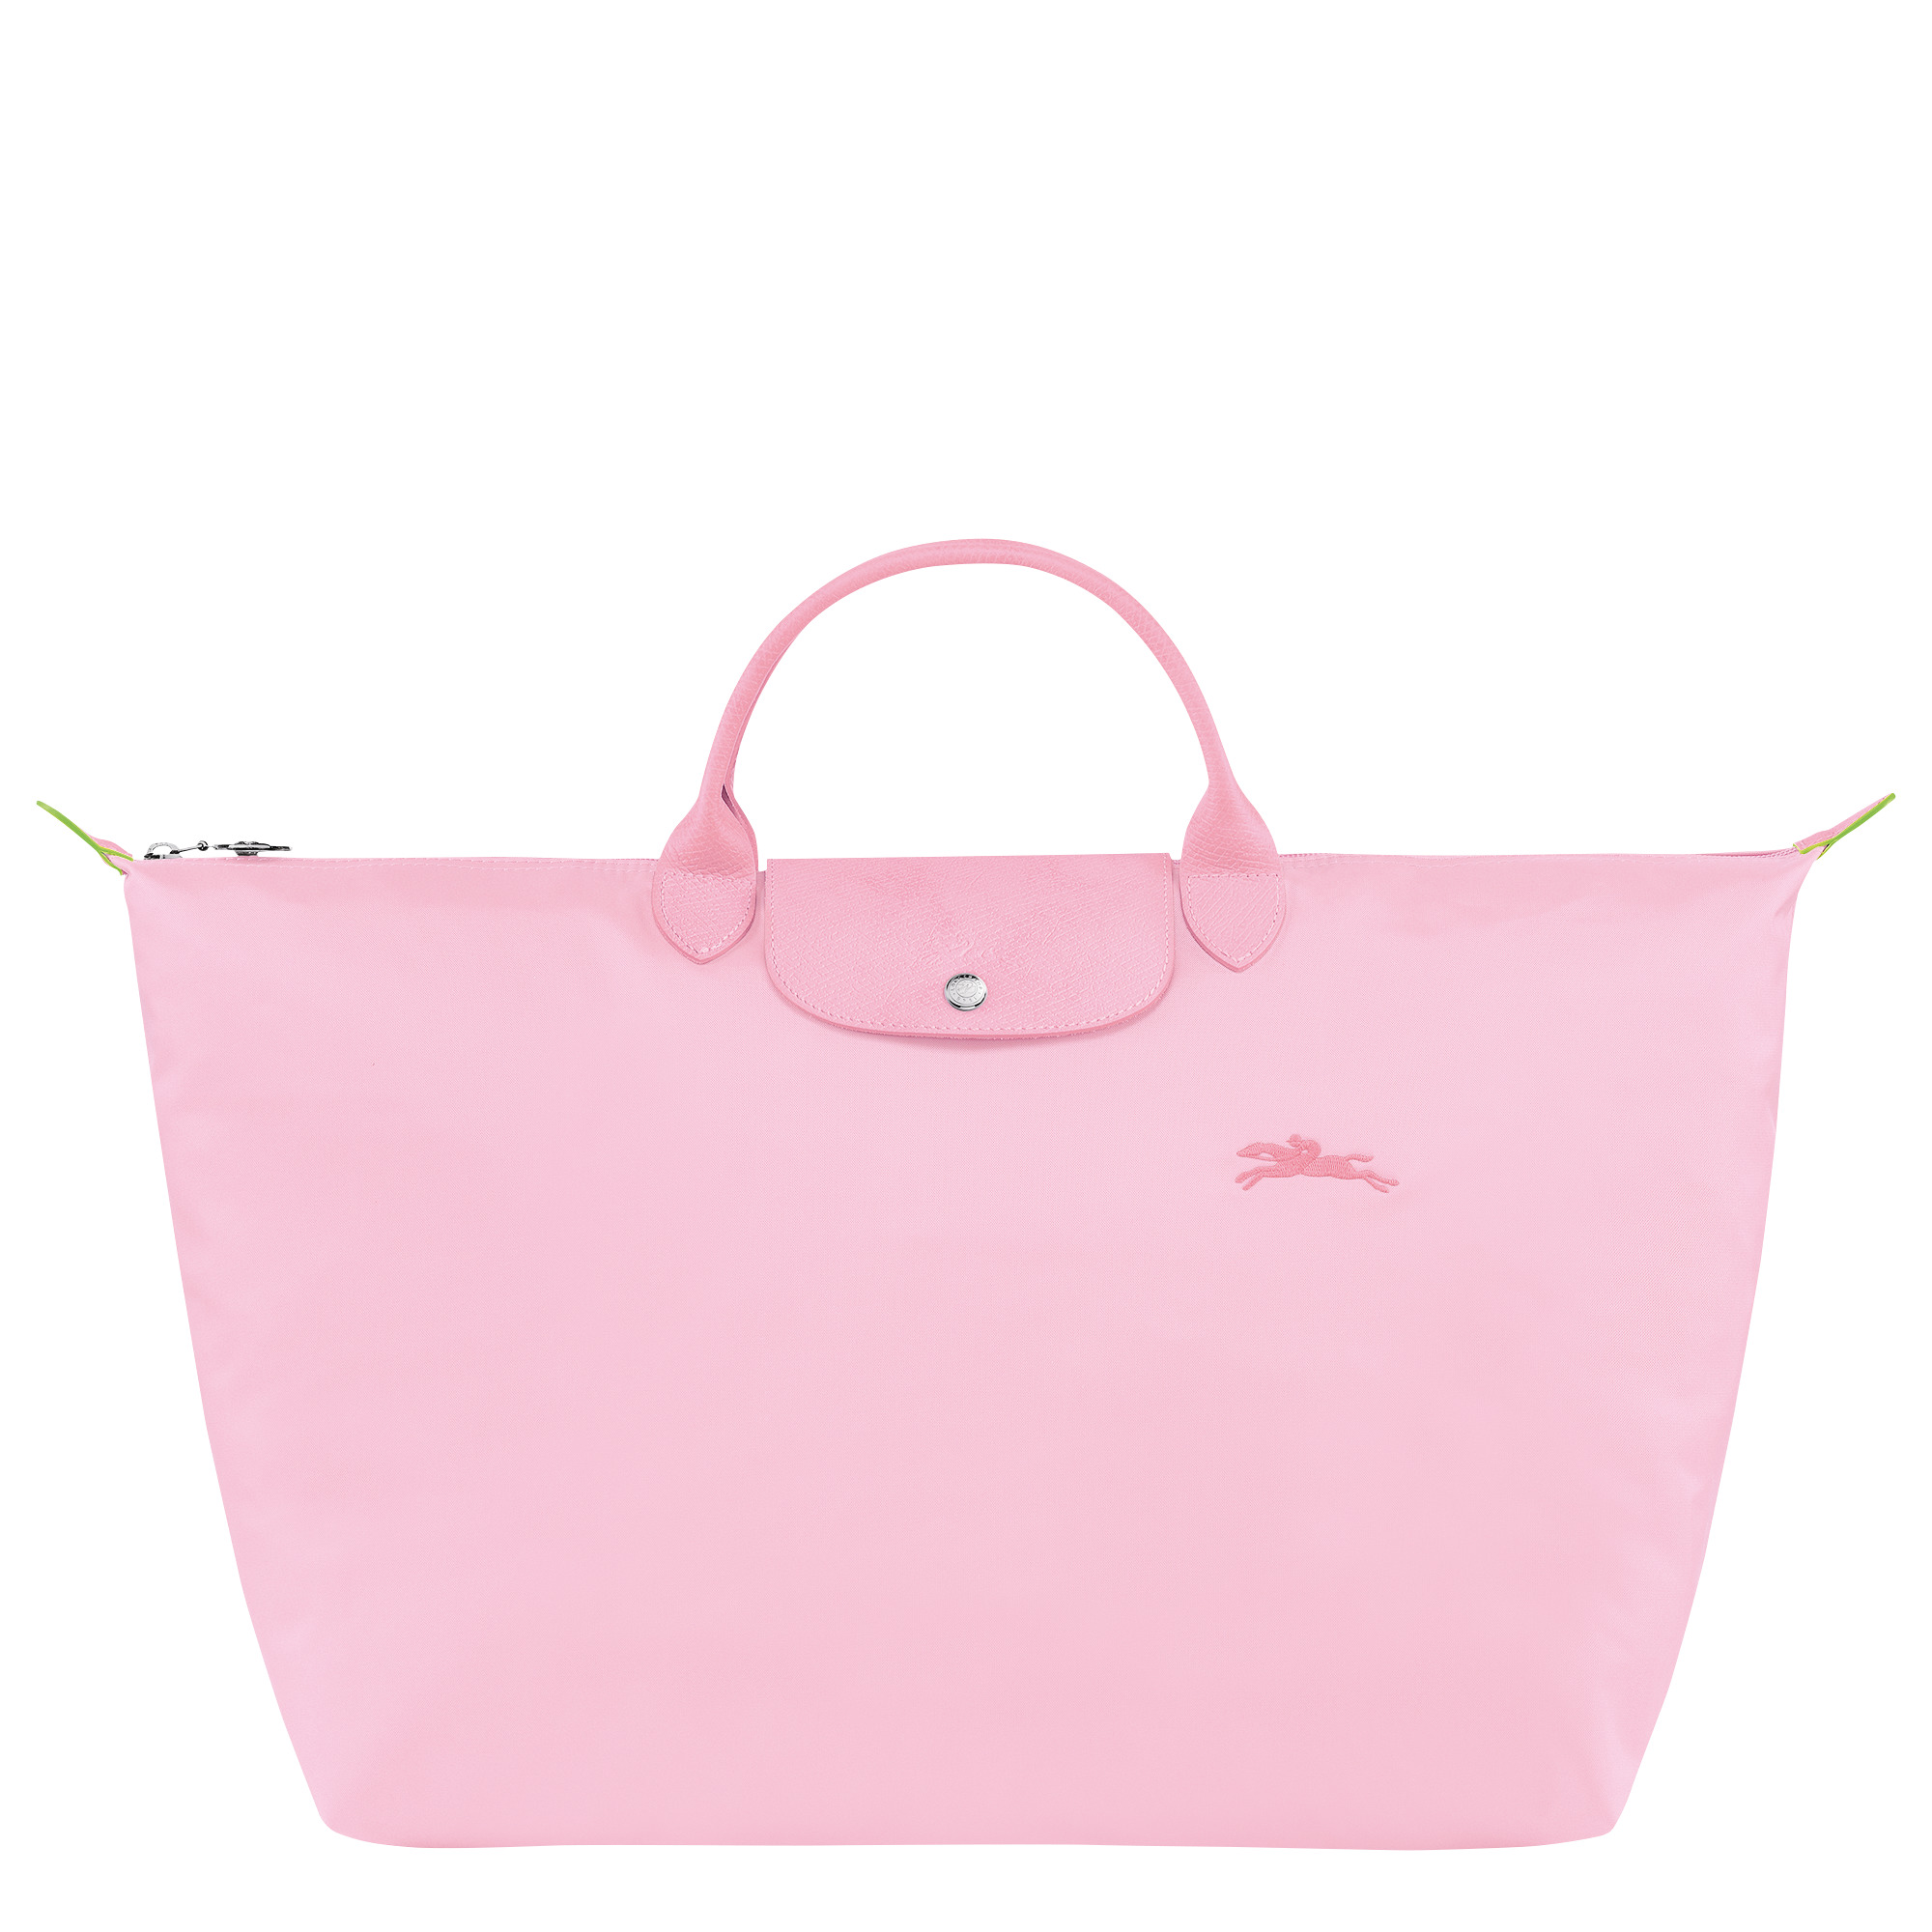 Longchamp Large Le Pliage Recycled Canvas Travel Bag in Grenadine